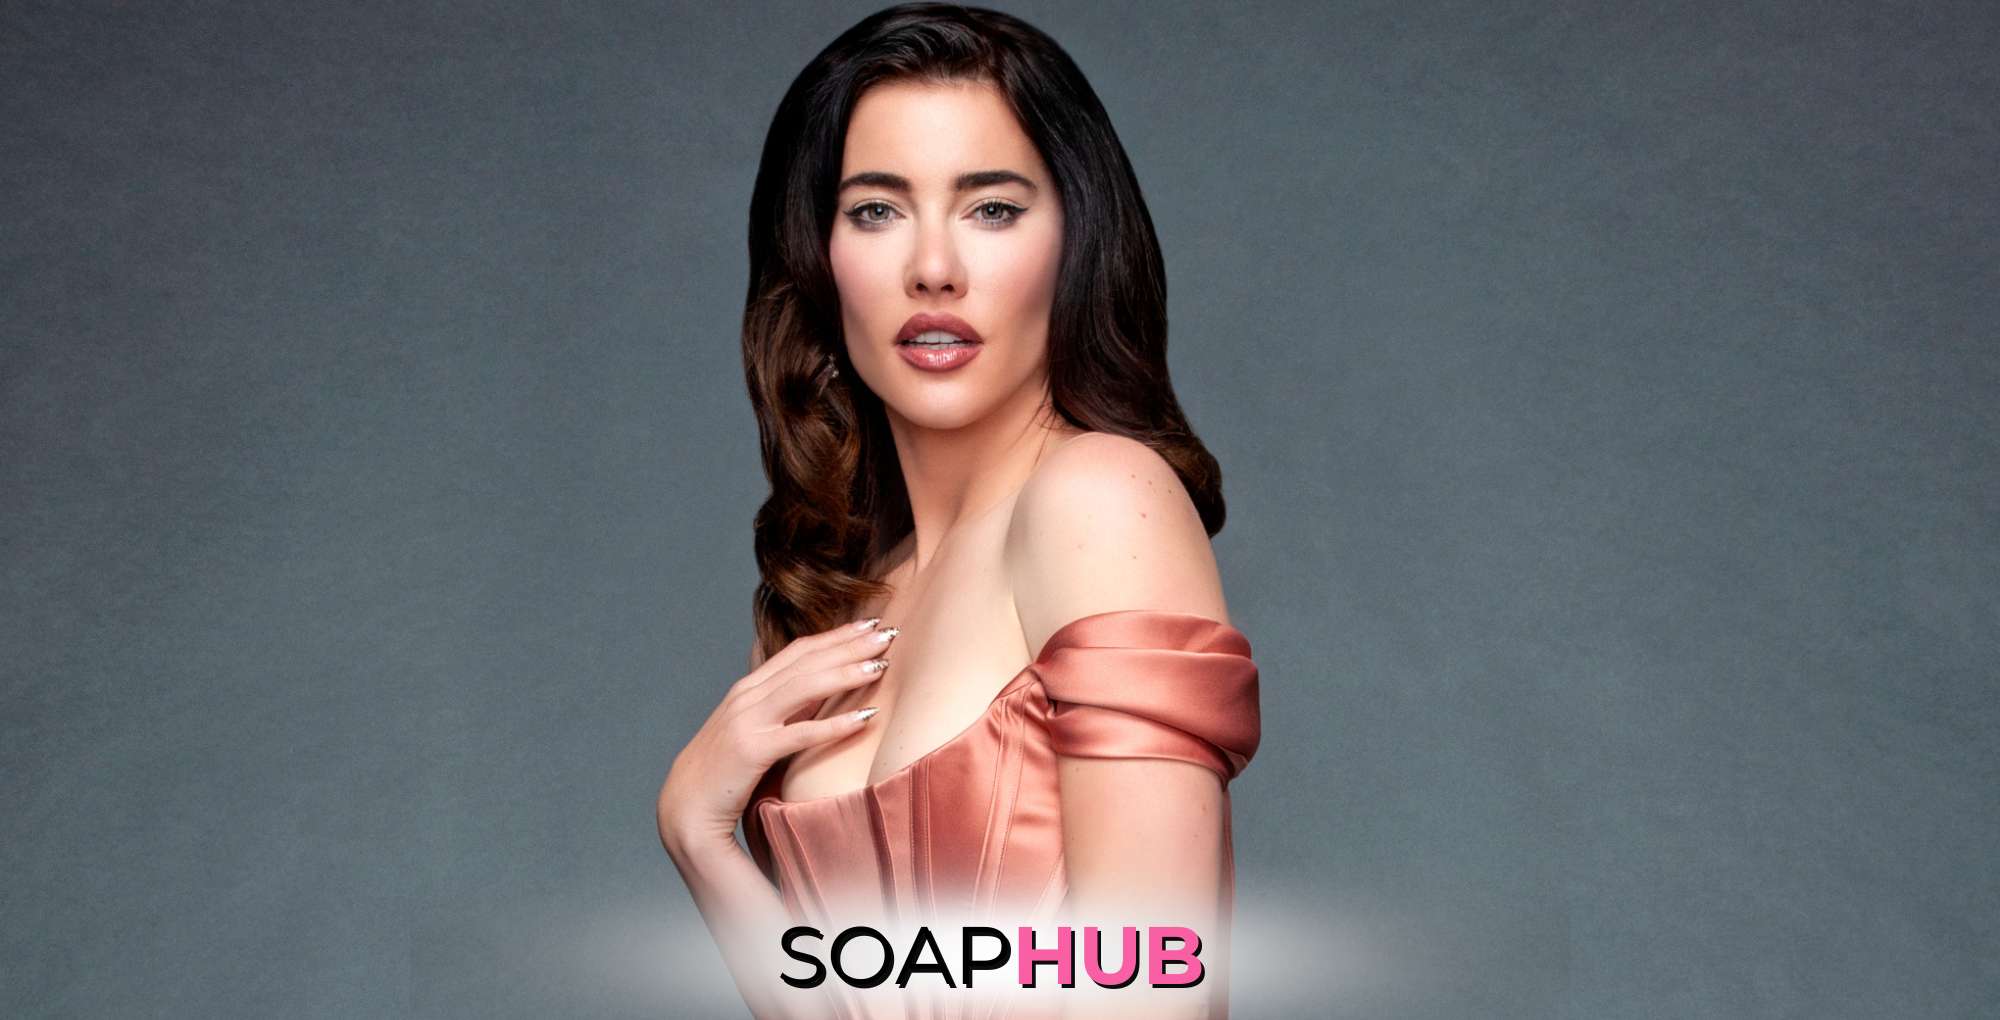 The Bold and the Beautiful star Jacqueline MacInnes Wood with the Soap Hub logo across the bottom.